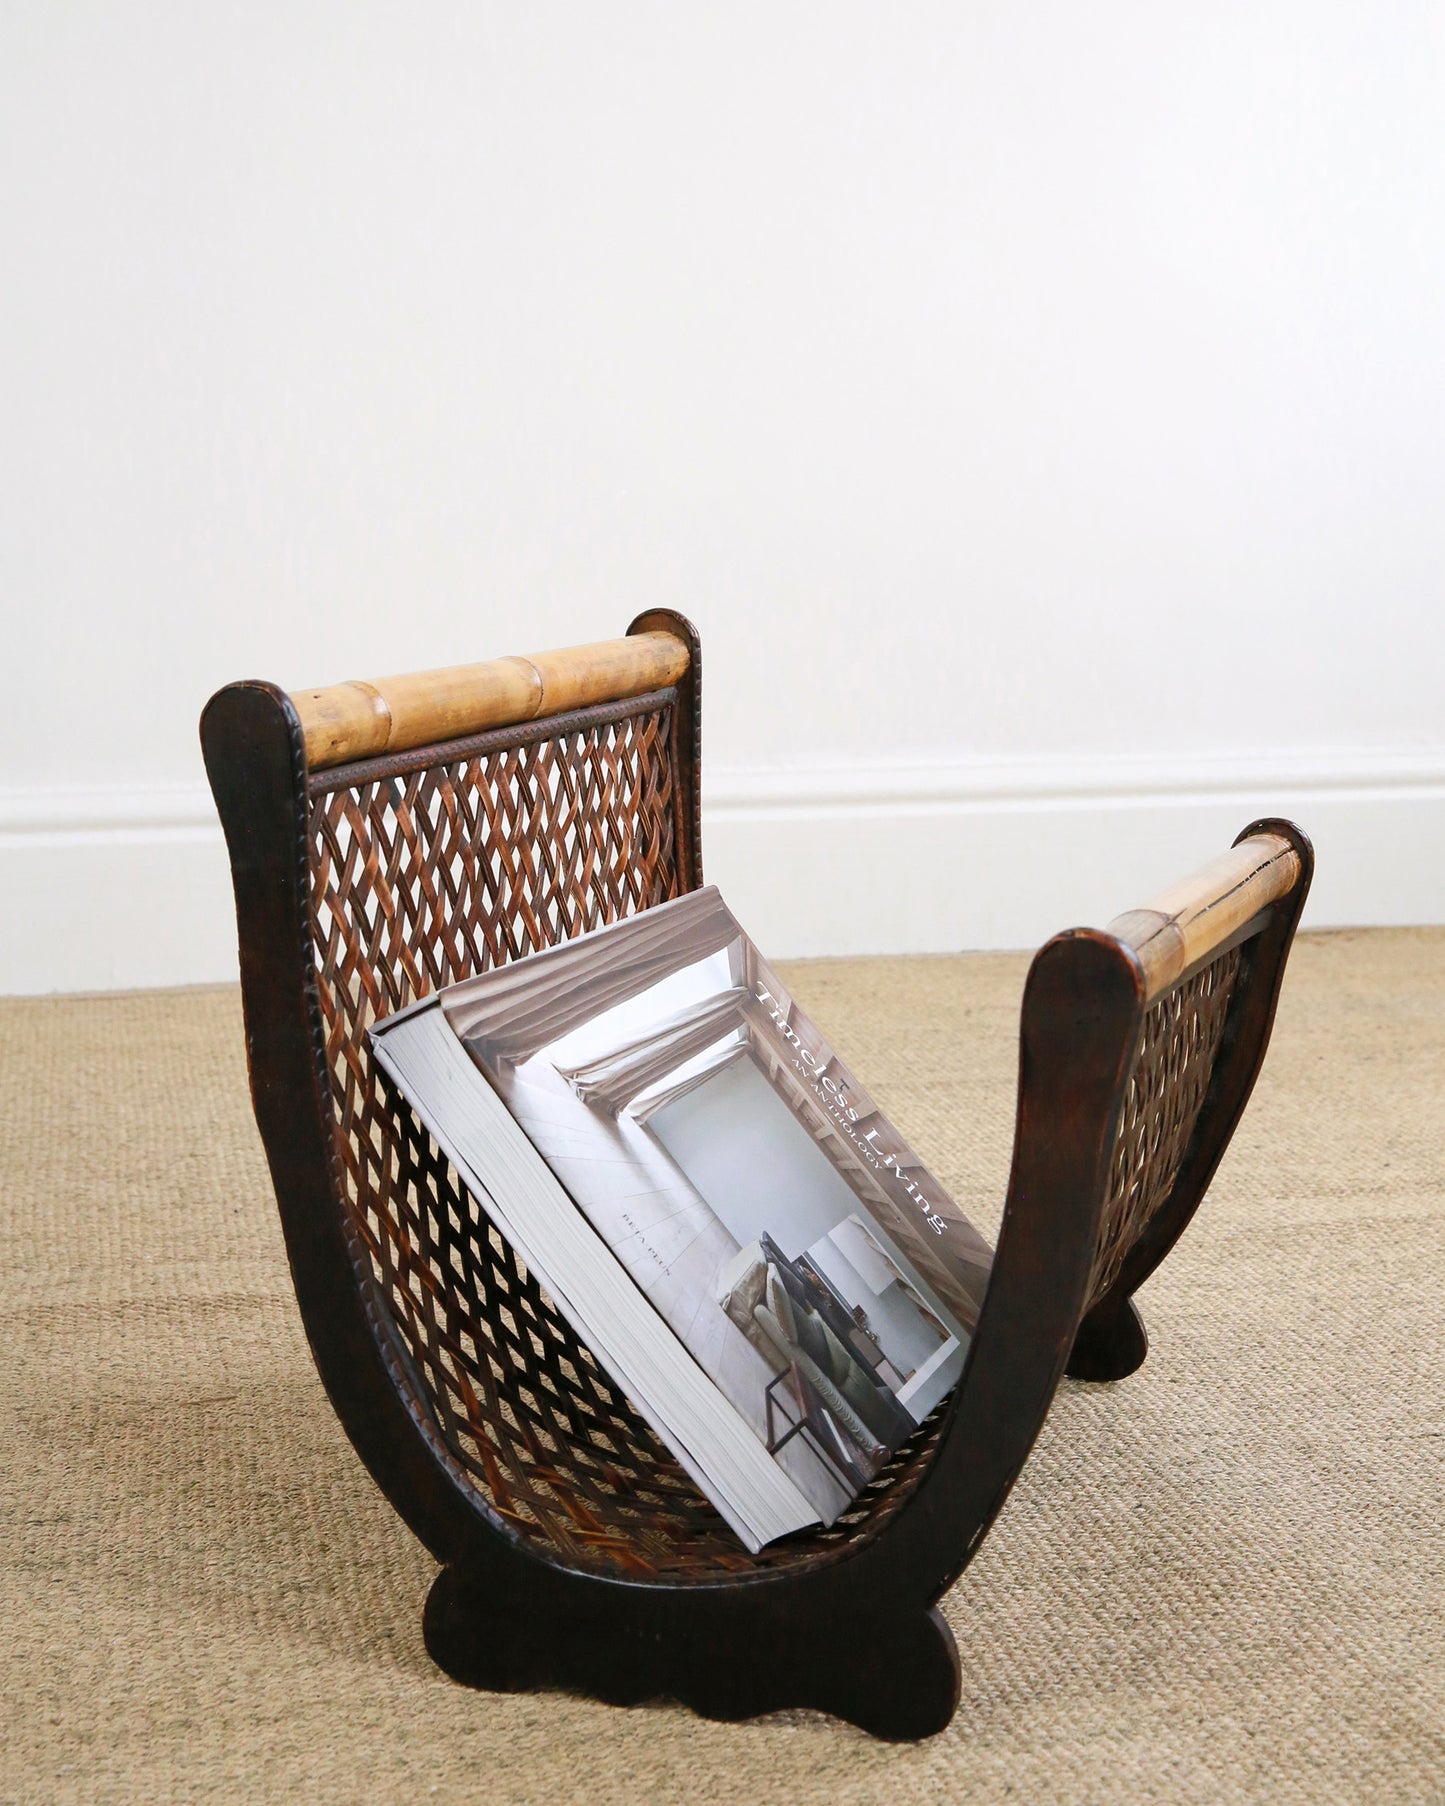 Vintage magazine rack styled with interiors book